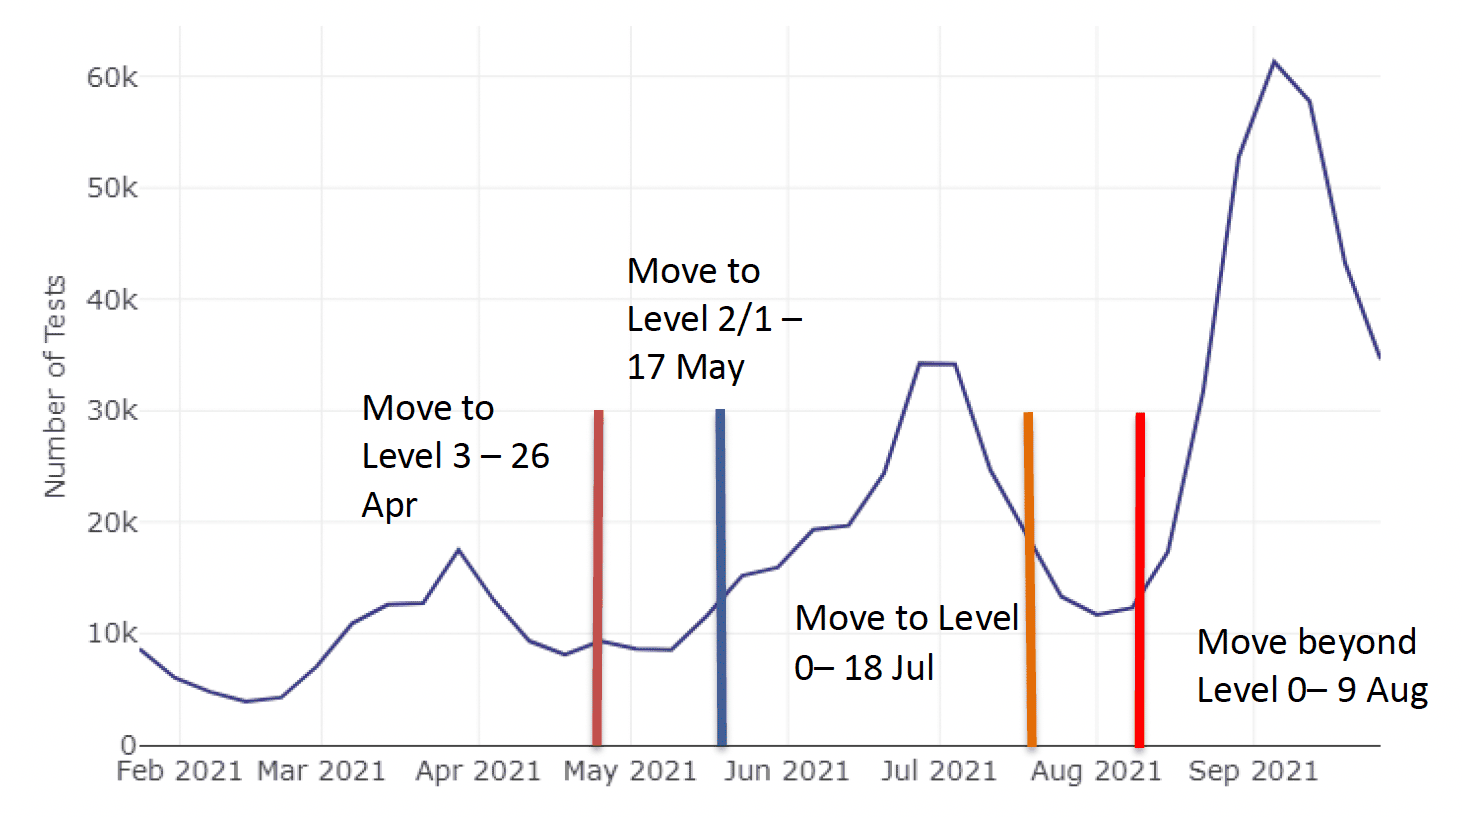 Figure 3 shows change over time in the weekly number of all tests carried out through targeted community testing. It shows 3 main peaks, each progressively larger than the previous one with an overall upward trend in the number getting tested. The peaks are at the end of March, the end of June/early July and one early in September. The chart also shows the time points at which restrictions eased starting with a move to level 3 restrictions on 26th April, a move to level 2/1 on 17th May, a move to level 0 on 18th July and the move beyond level 0 on 9th August. The first two time points were followed by the second peak. The second two time points were followed by the third peak.